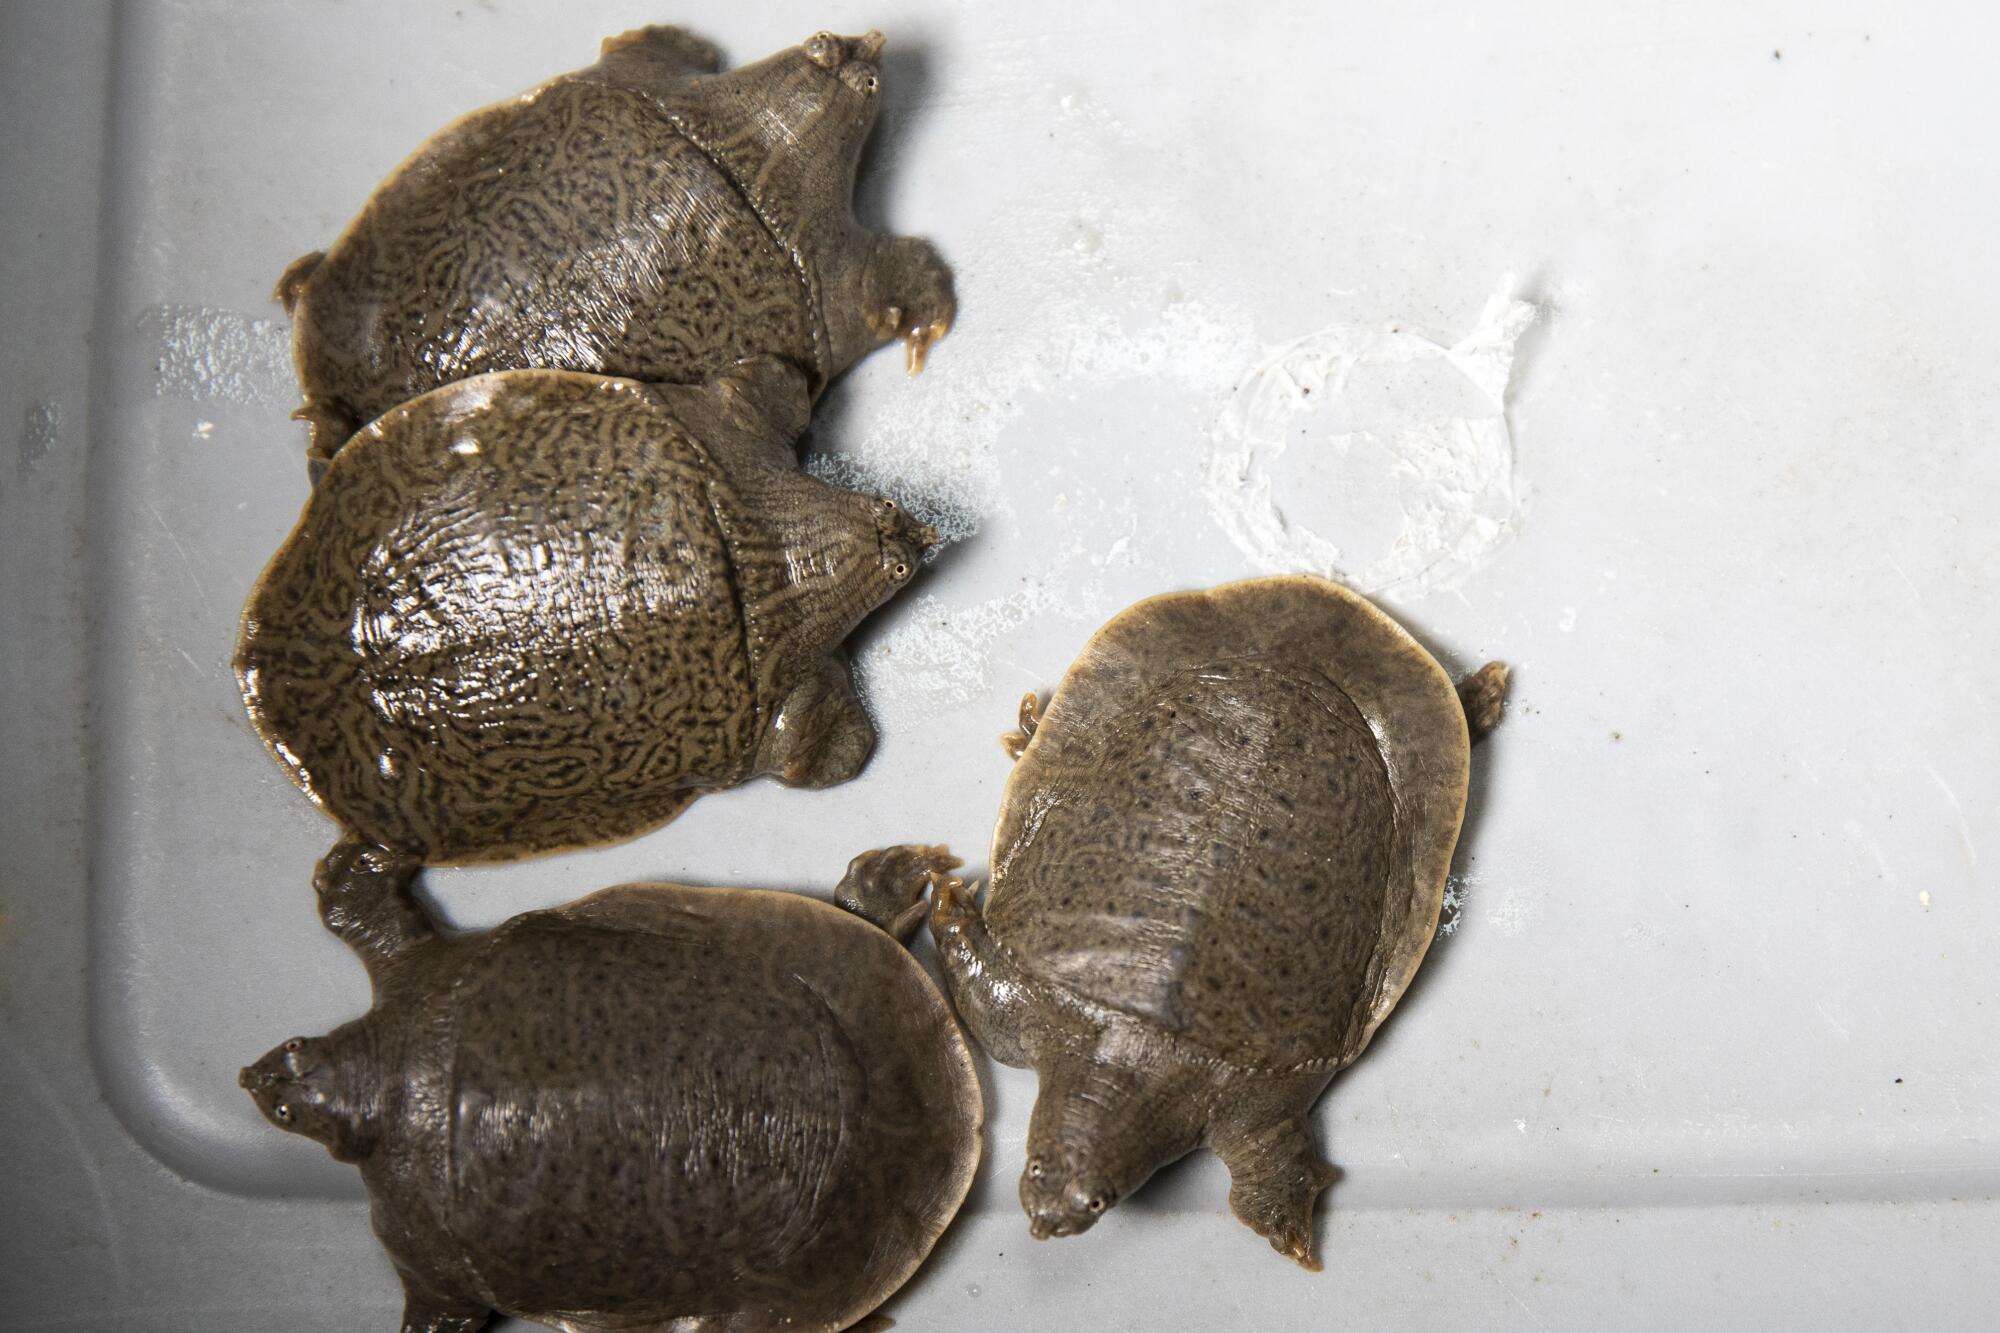 The San Diego Zoo recently found about 41 Indian narrow-headed softshell turtle hatchlings 